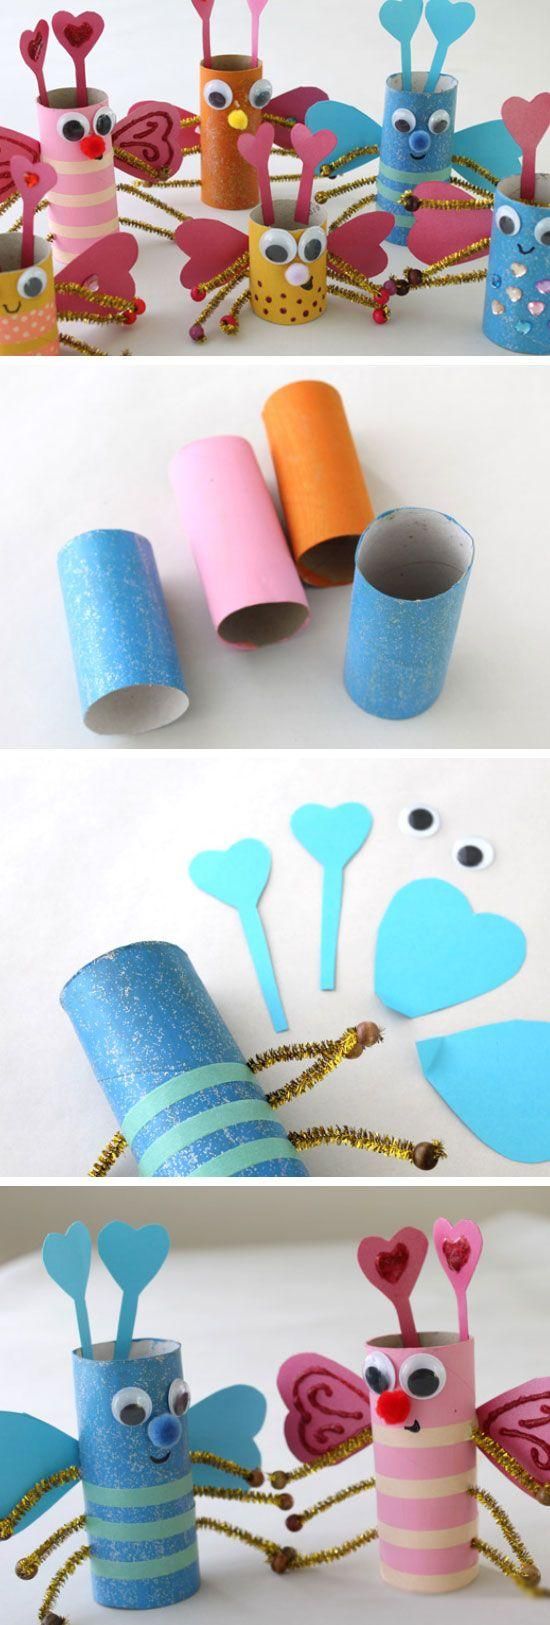 easy paper roll crafts for kids